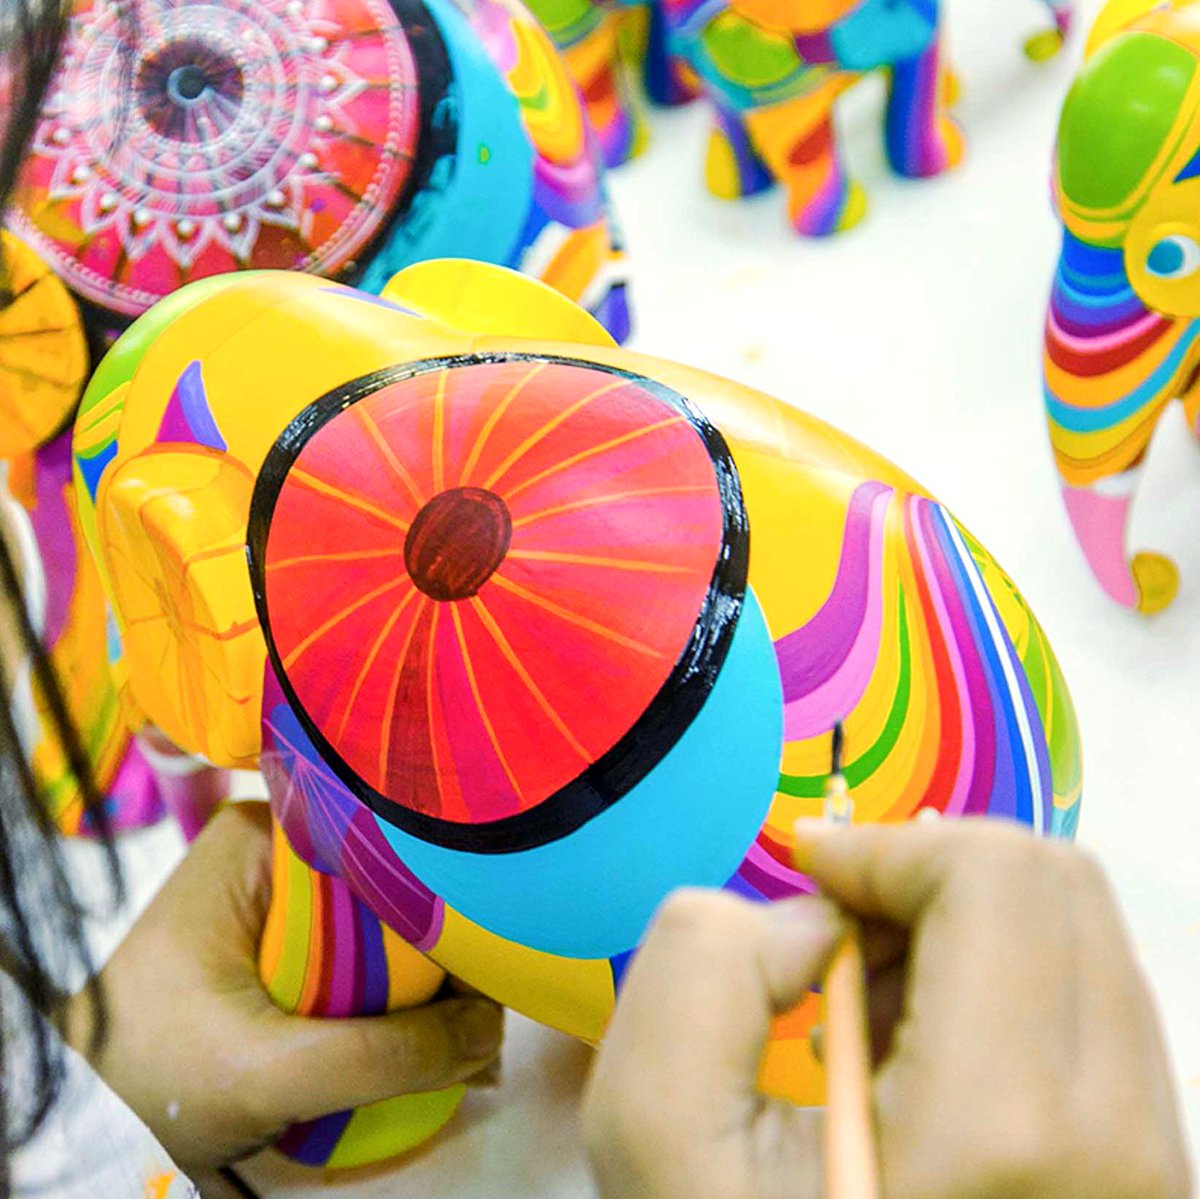 Replicas of elephant 'Colours of Chiang Mai' by Khunakorn Muenpang are being hand painted by one of our talented studio artists 🖌️⭐️ #SneakpeekSunday⁠ ⁠ #elephantparade #elephantstatue #handpainted #elephantparadefan⁠ #art⁠ #handcrafted #elephantlover